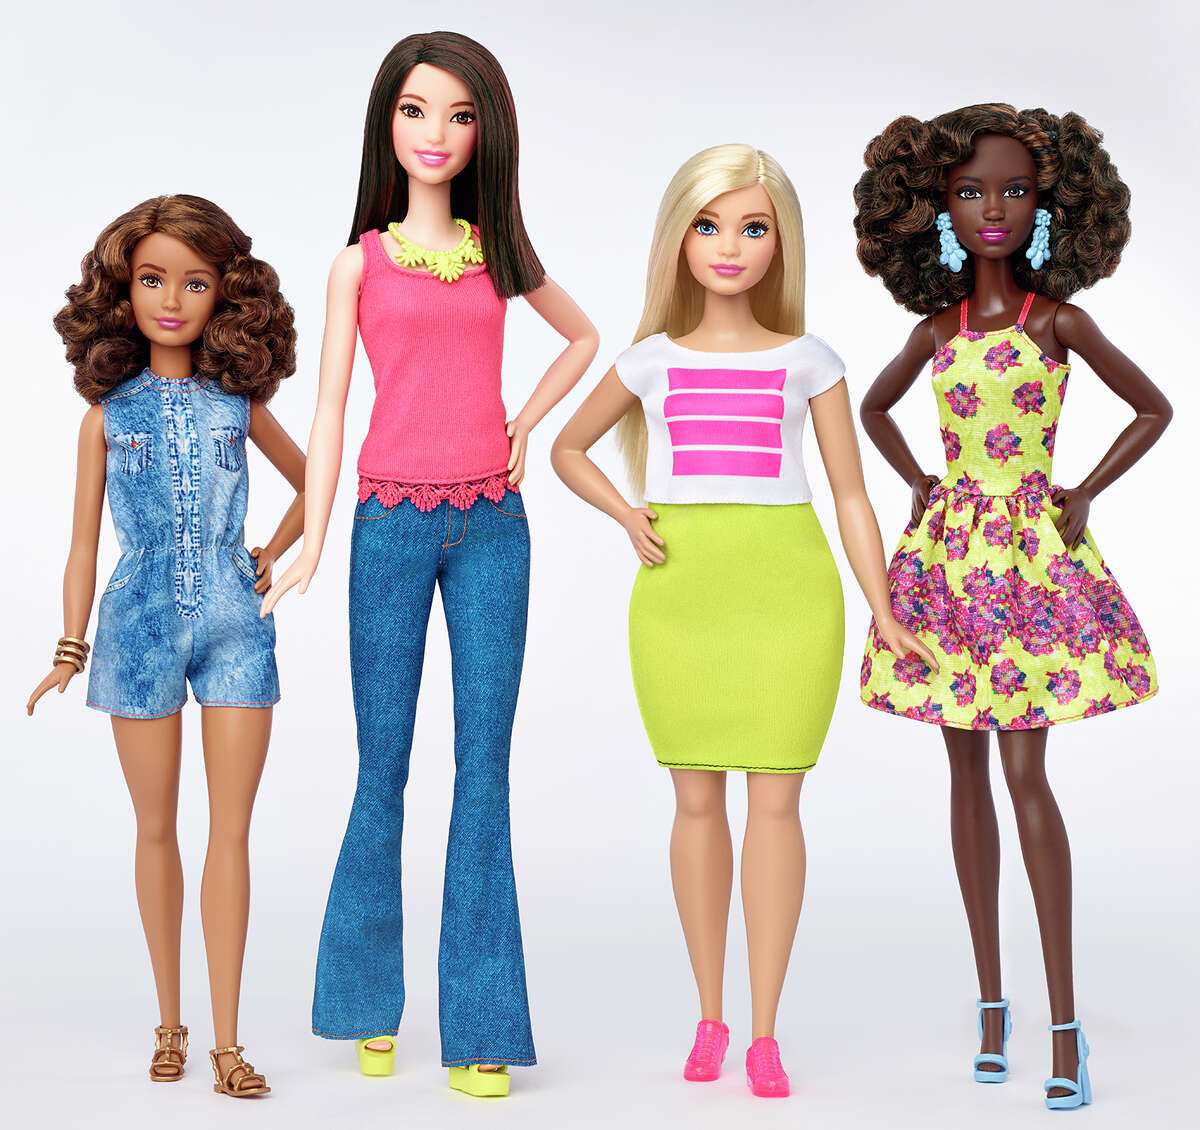 Body diversity This photo provided by Mattel shows a group of new Barbie dolls introduced in January 2016. Mattel, the maker of the famous plastic doll, said it will start selling Barbies in three new body types: tall, curvy and petite. She’ll also come in seven skin tones, 22 eye colors and 24 hairstyles.